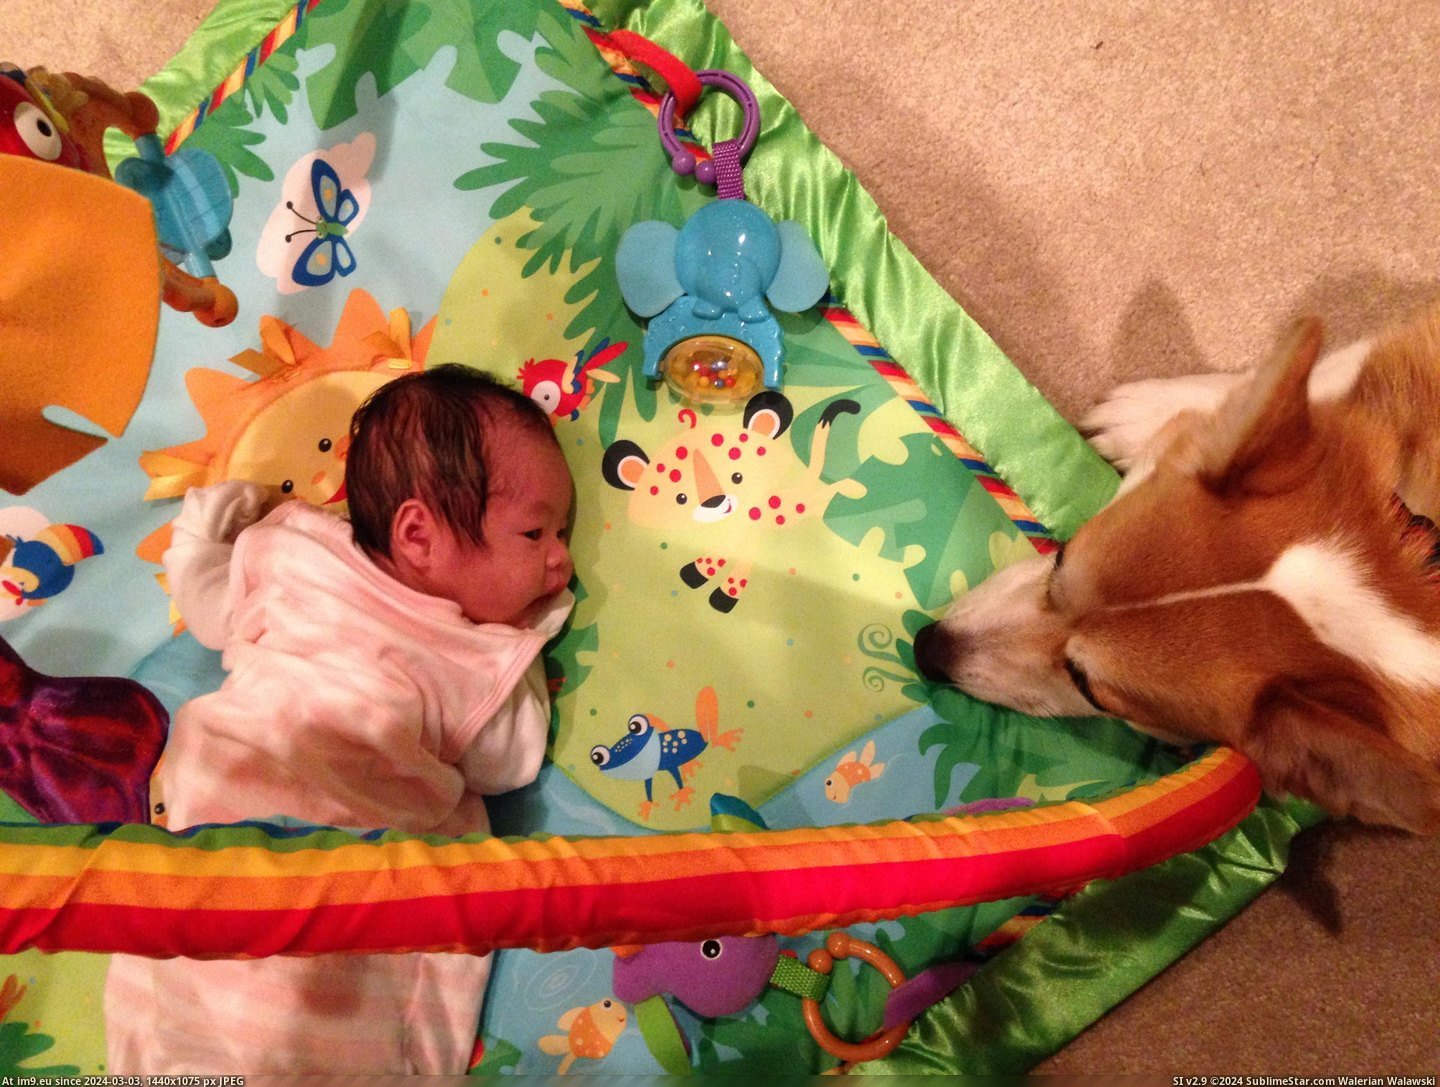 #Was #New #Ago #But #How #Daughter #Weeks #Born [Aww] My daughter was born three weeks ago. I worried about how my corgi would react but he's treating her like his new BFF... 2 Pic. (Obraz z album My r/AWW favs))